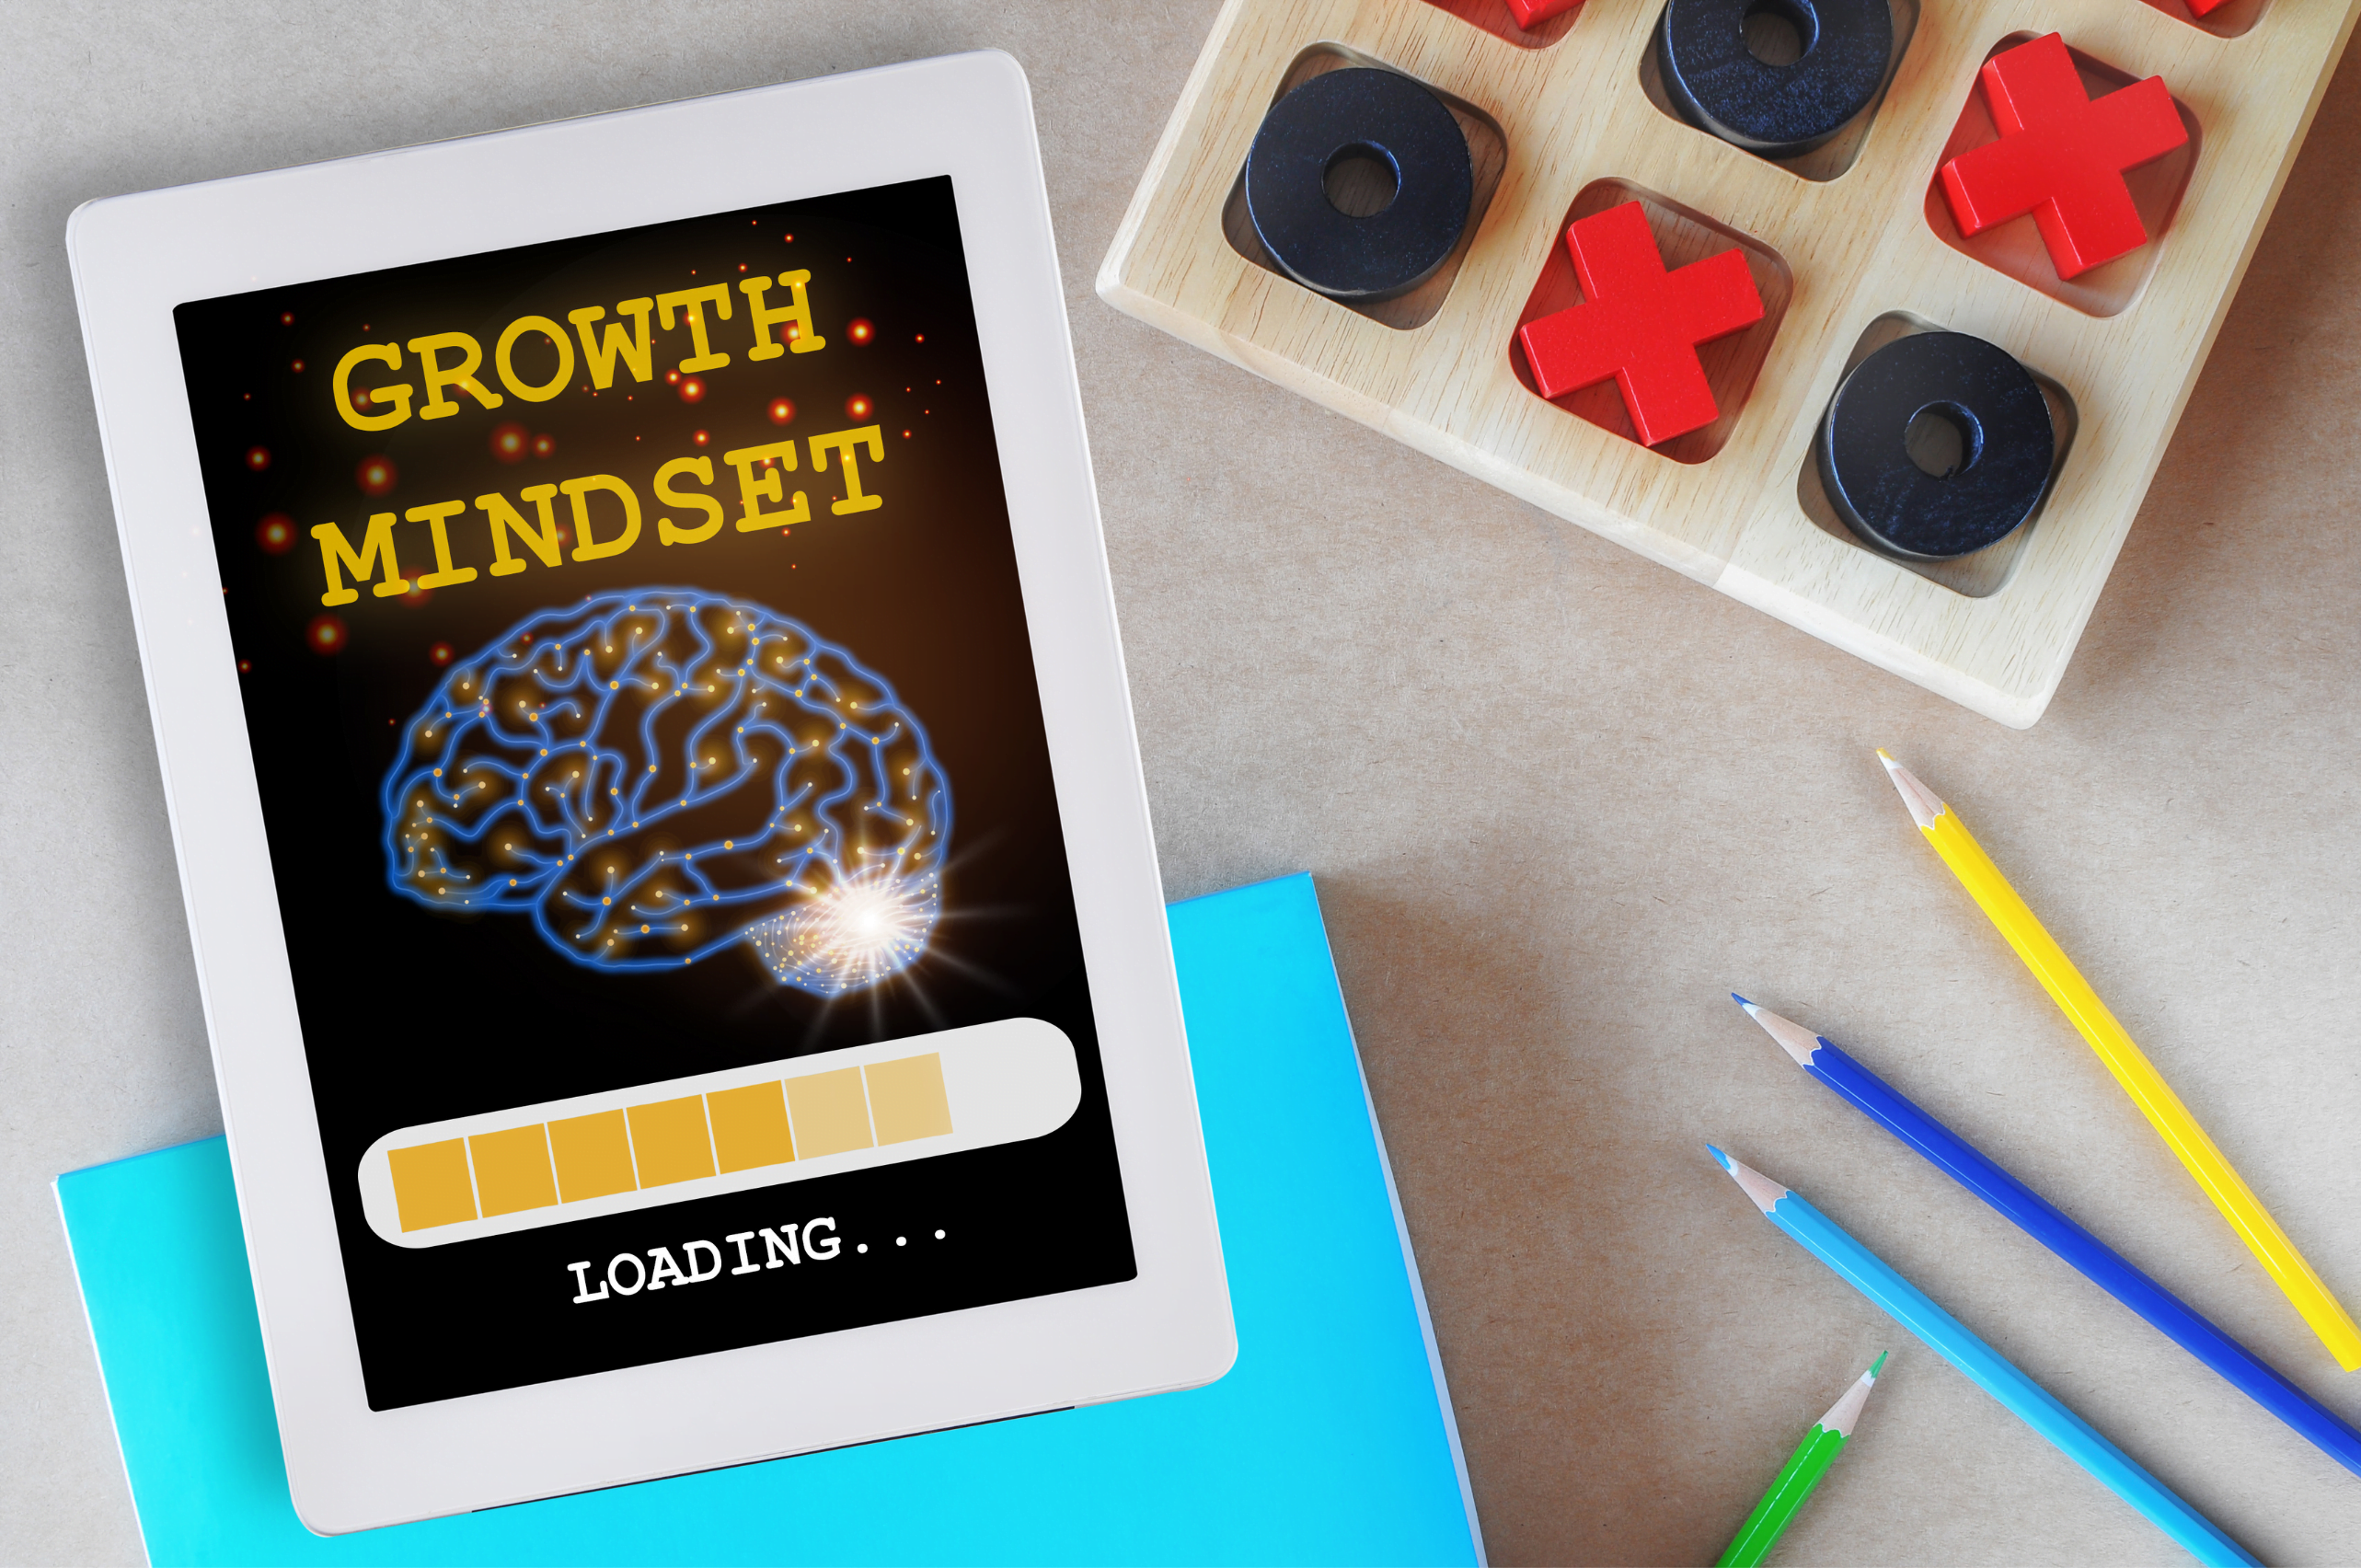 Growth mindset loading is the key to lifelong learning